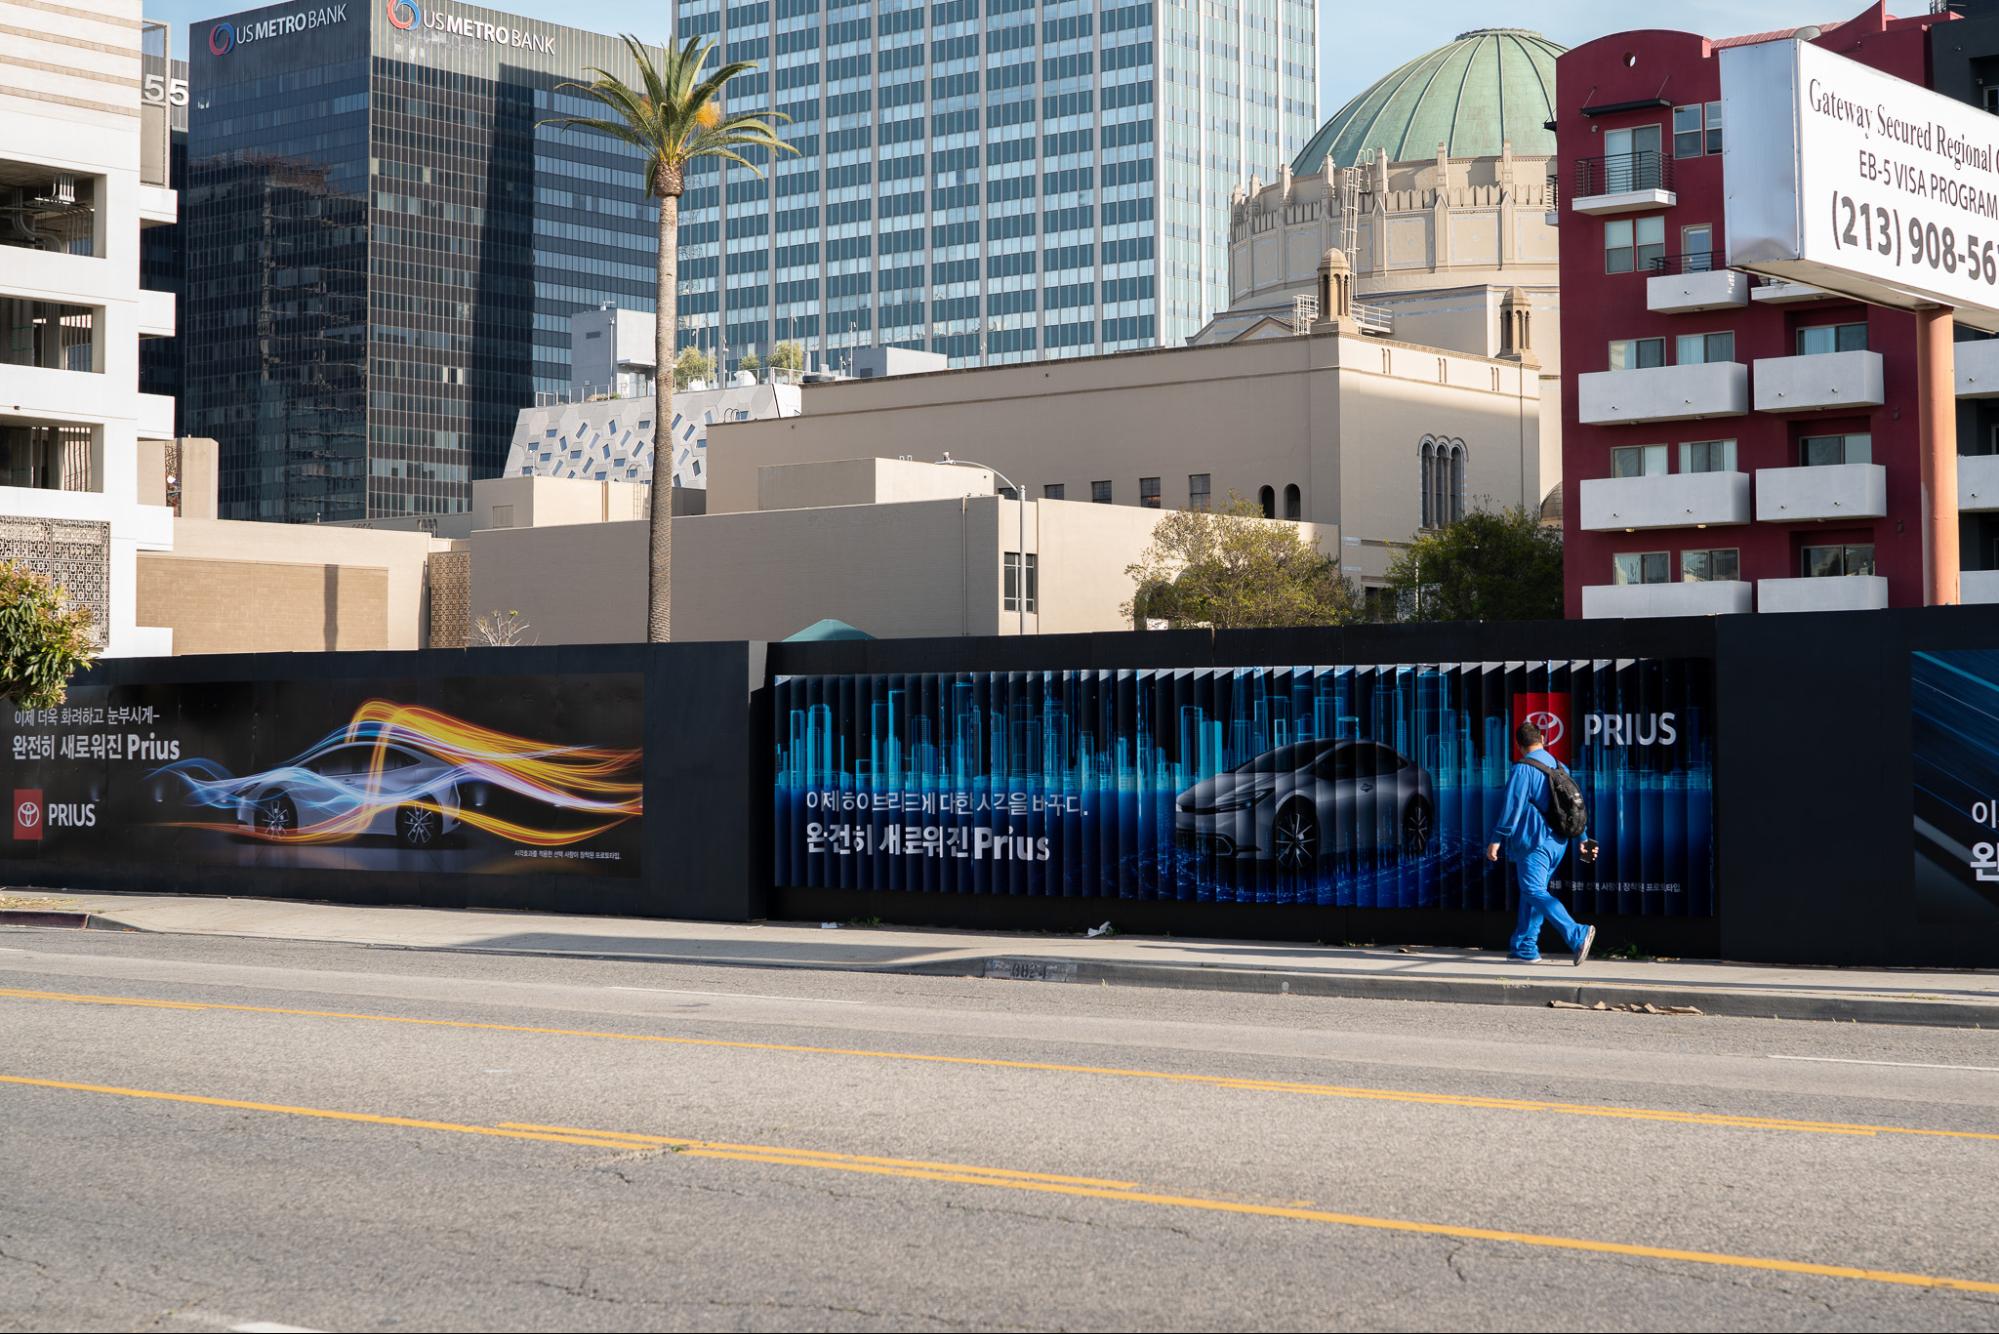 Toyota Prius Lenticular Featured Image LA Out-of-Home Advertising